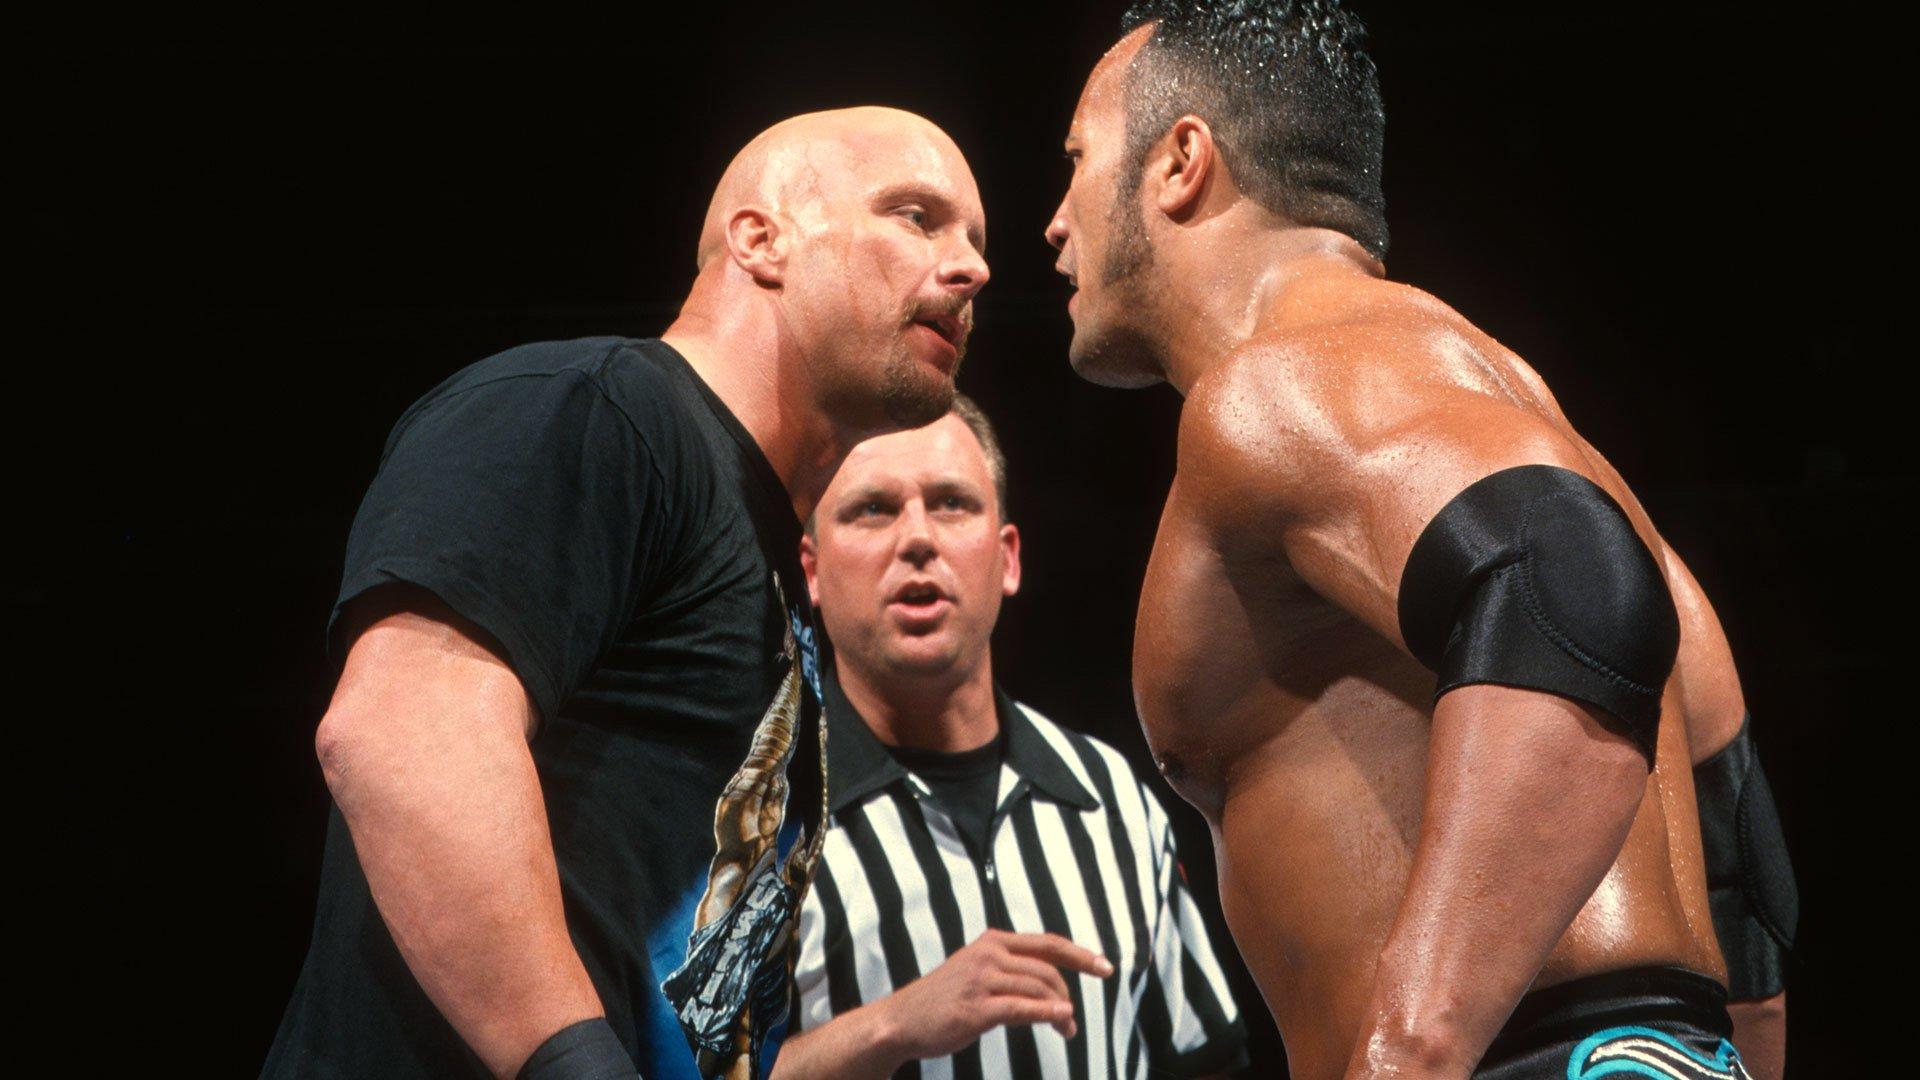 Stone Cold Steve Austin and The Rock's championship clash at